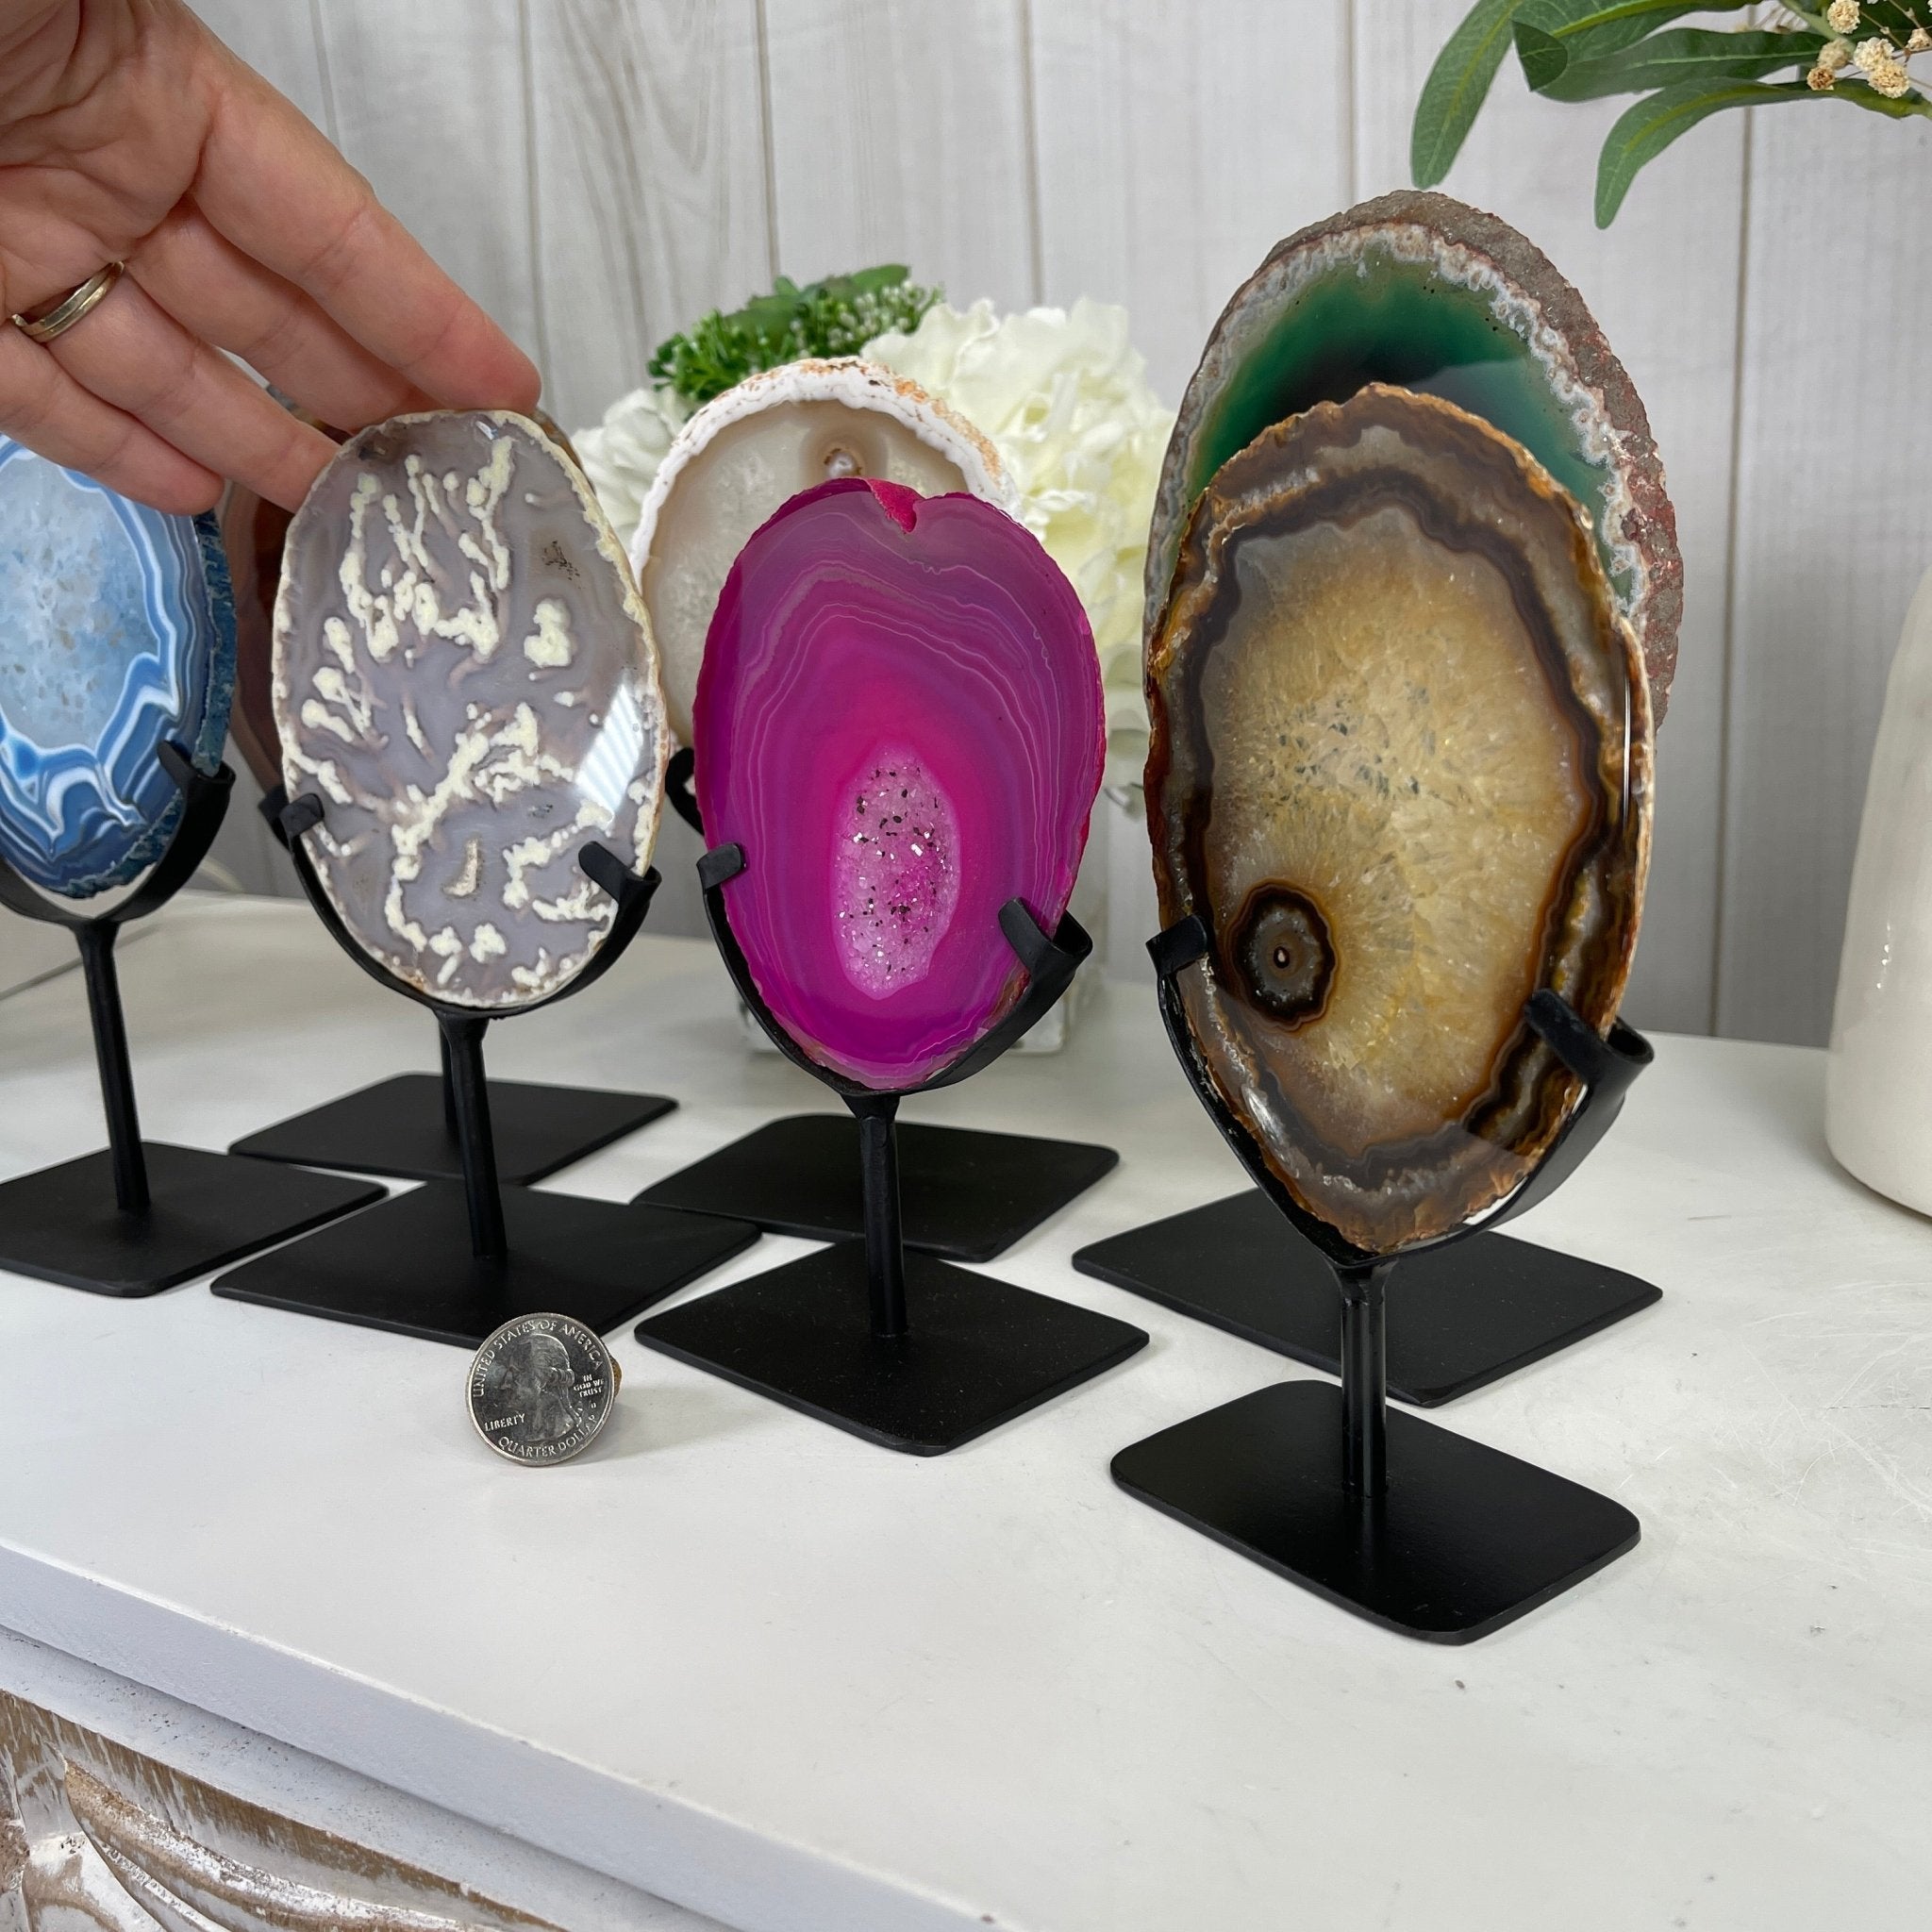 Special Smaller Dyed Blue, Pink, Green Brazilian Agate Slices on Metal Stands Model #5067 by Brazil Gems - Brazil GemsBrazil GemsSpecial Smaller Dyed Blue, Pink, Green Brazilian Agate Slices on Metal Stands Model #5067 by Brazil GemsSlices on Fixed Bases5067GR-001